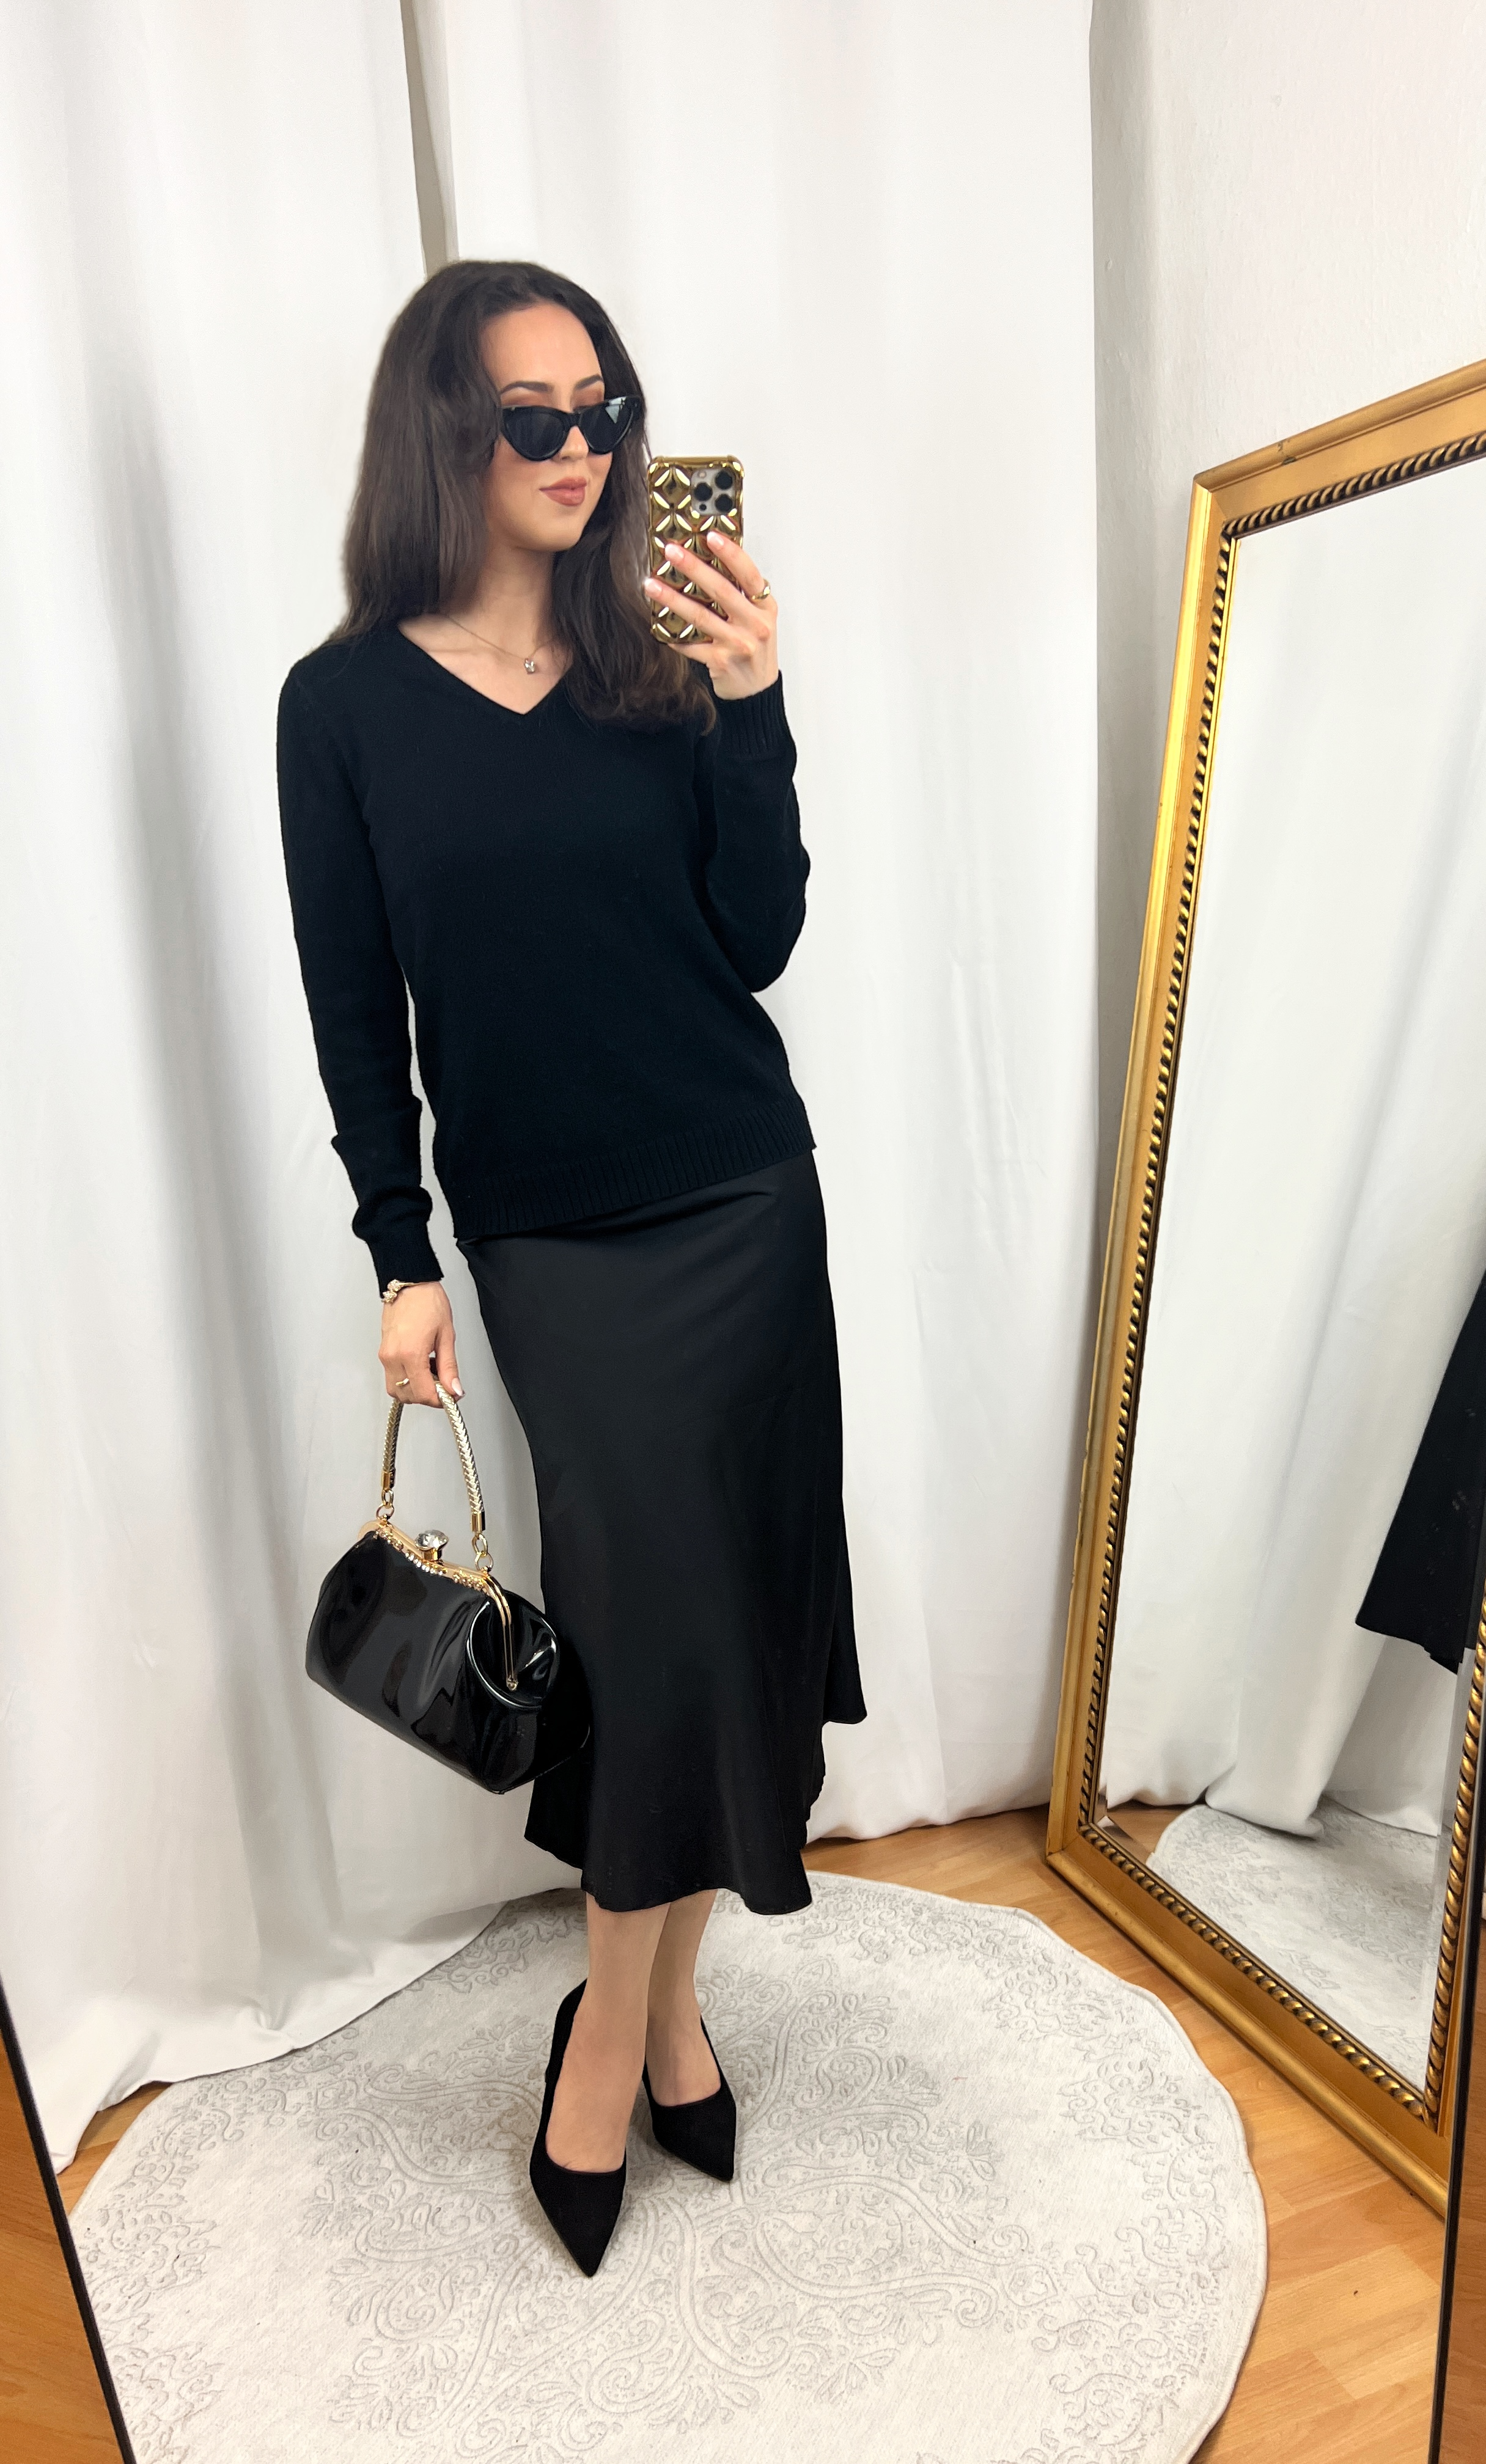 Thin Black Sweater and Black Satin Skirt Outfit